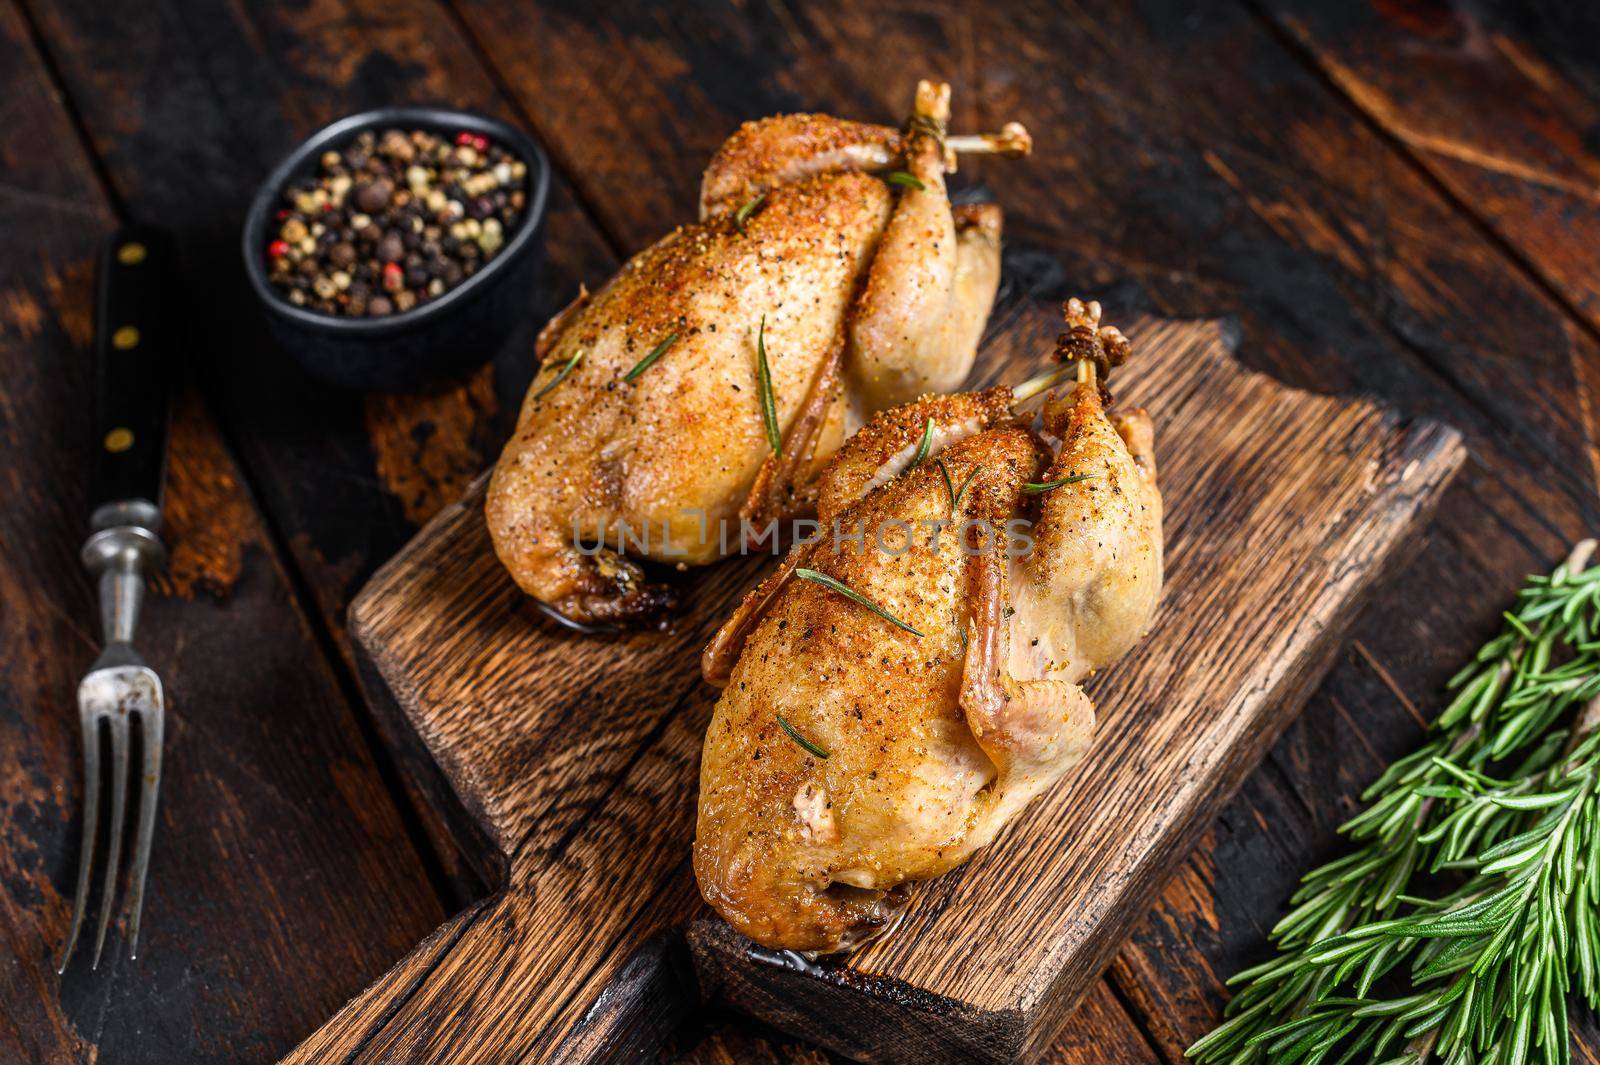 Homemade baked quail on a cutting board. Dark Wooden background. Top view by Composter